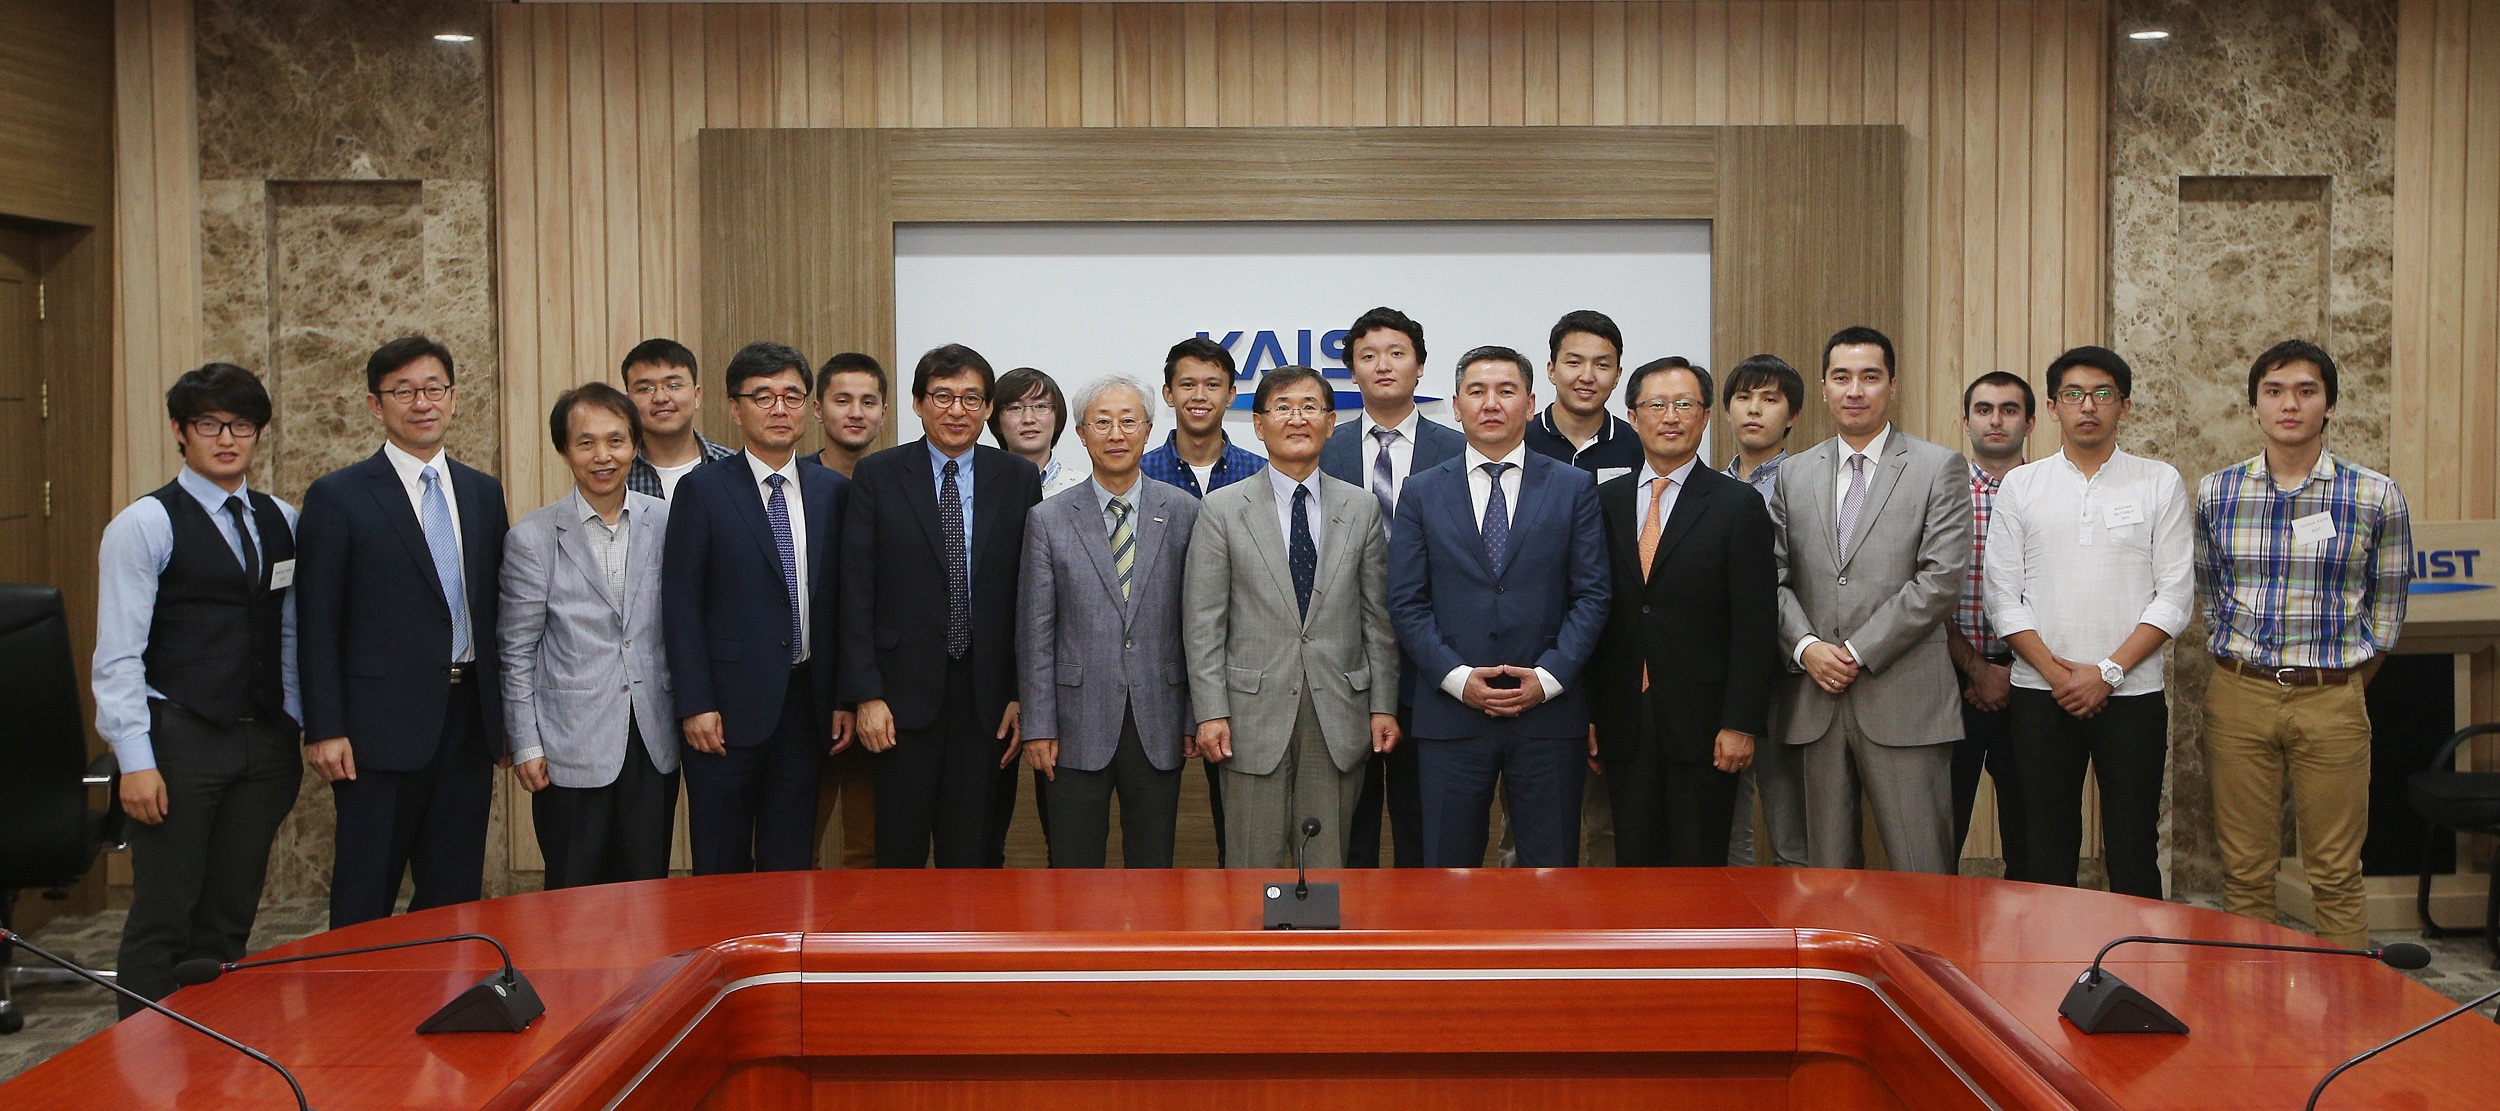 The Minister of Education of Kazakhstan Visits KAIST 이미지